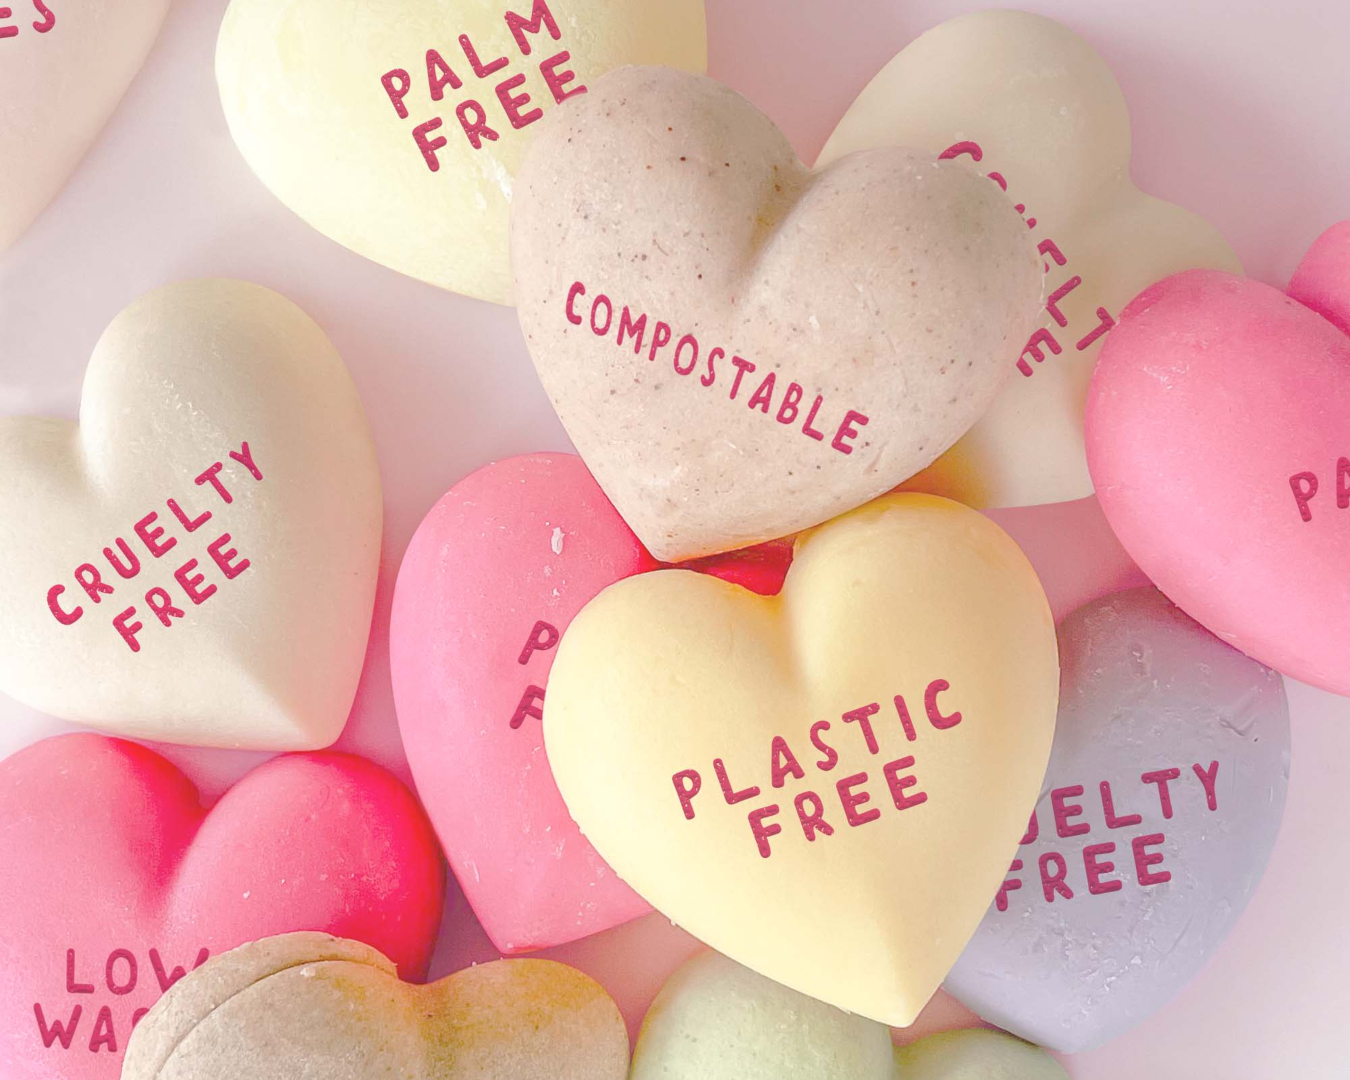 Different coloured hearts of Ethique sampler bars with statements such as 'plastic free', 'compostable' and 'cruelty free' written on each one in pink lettering.